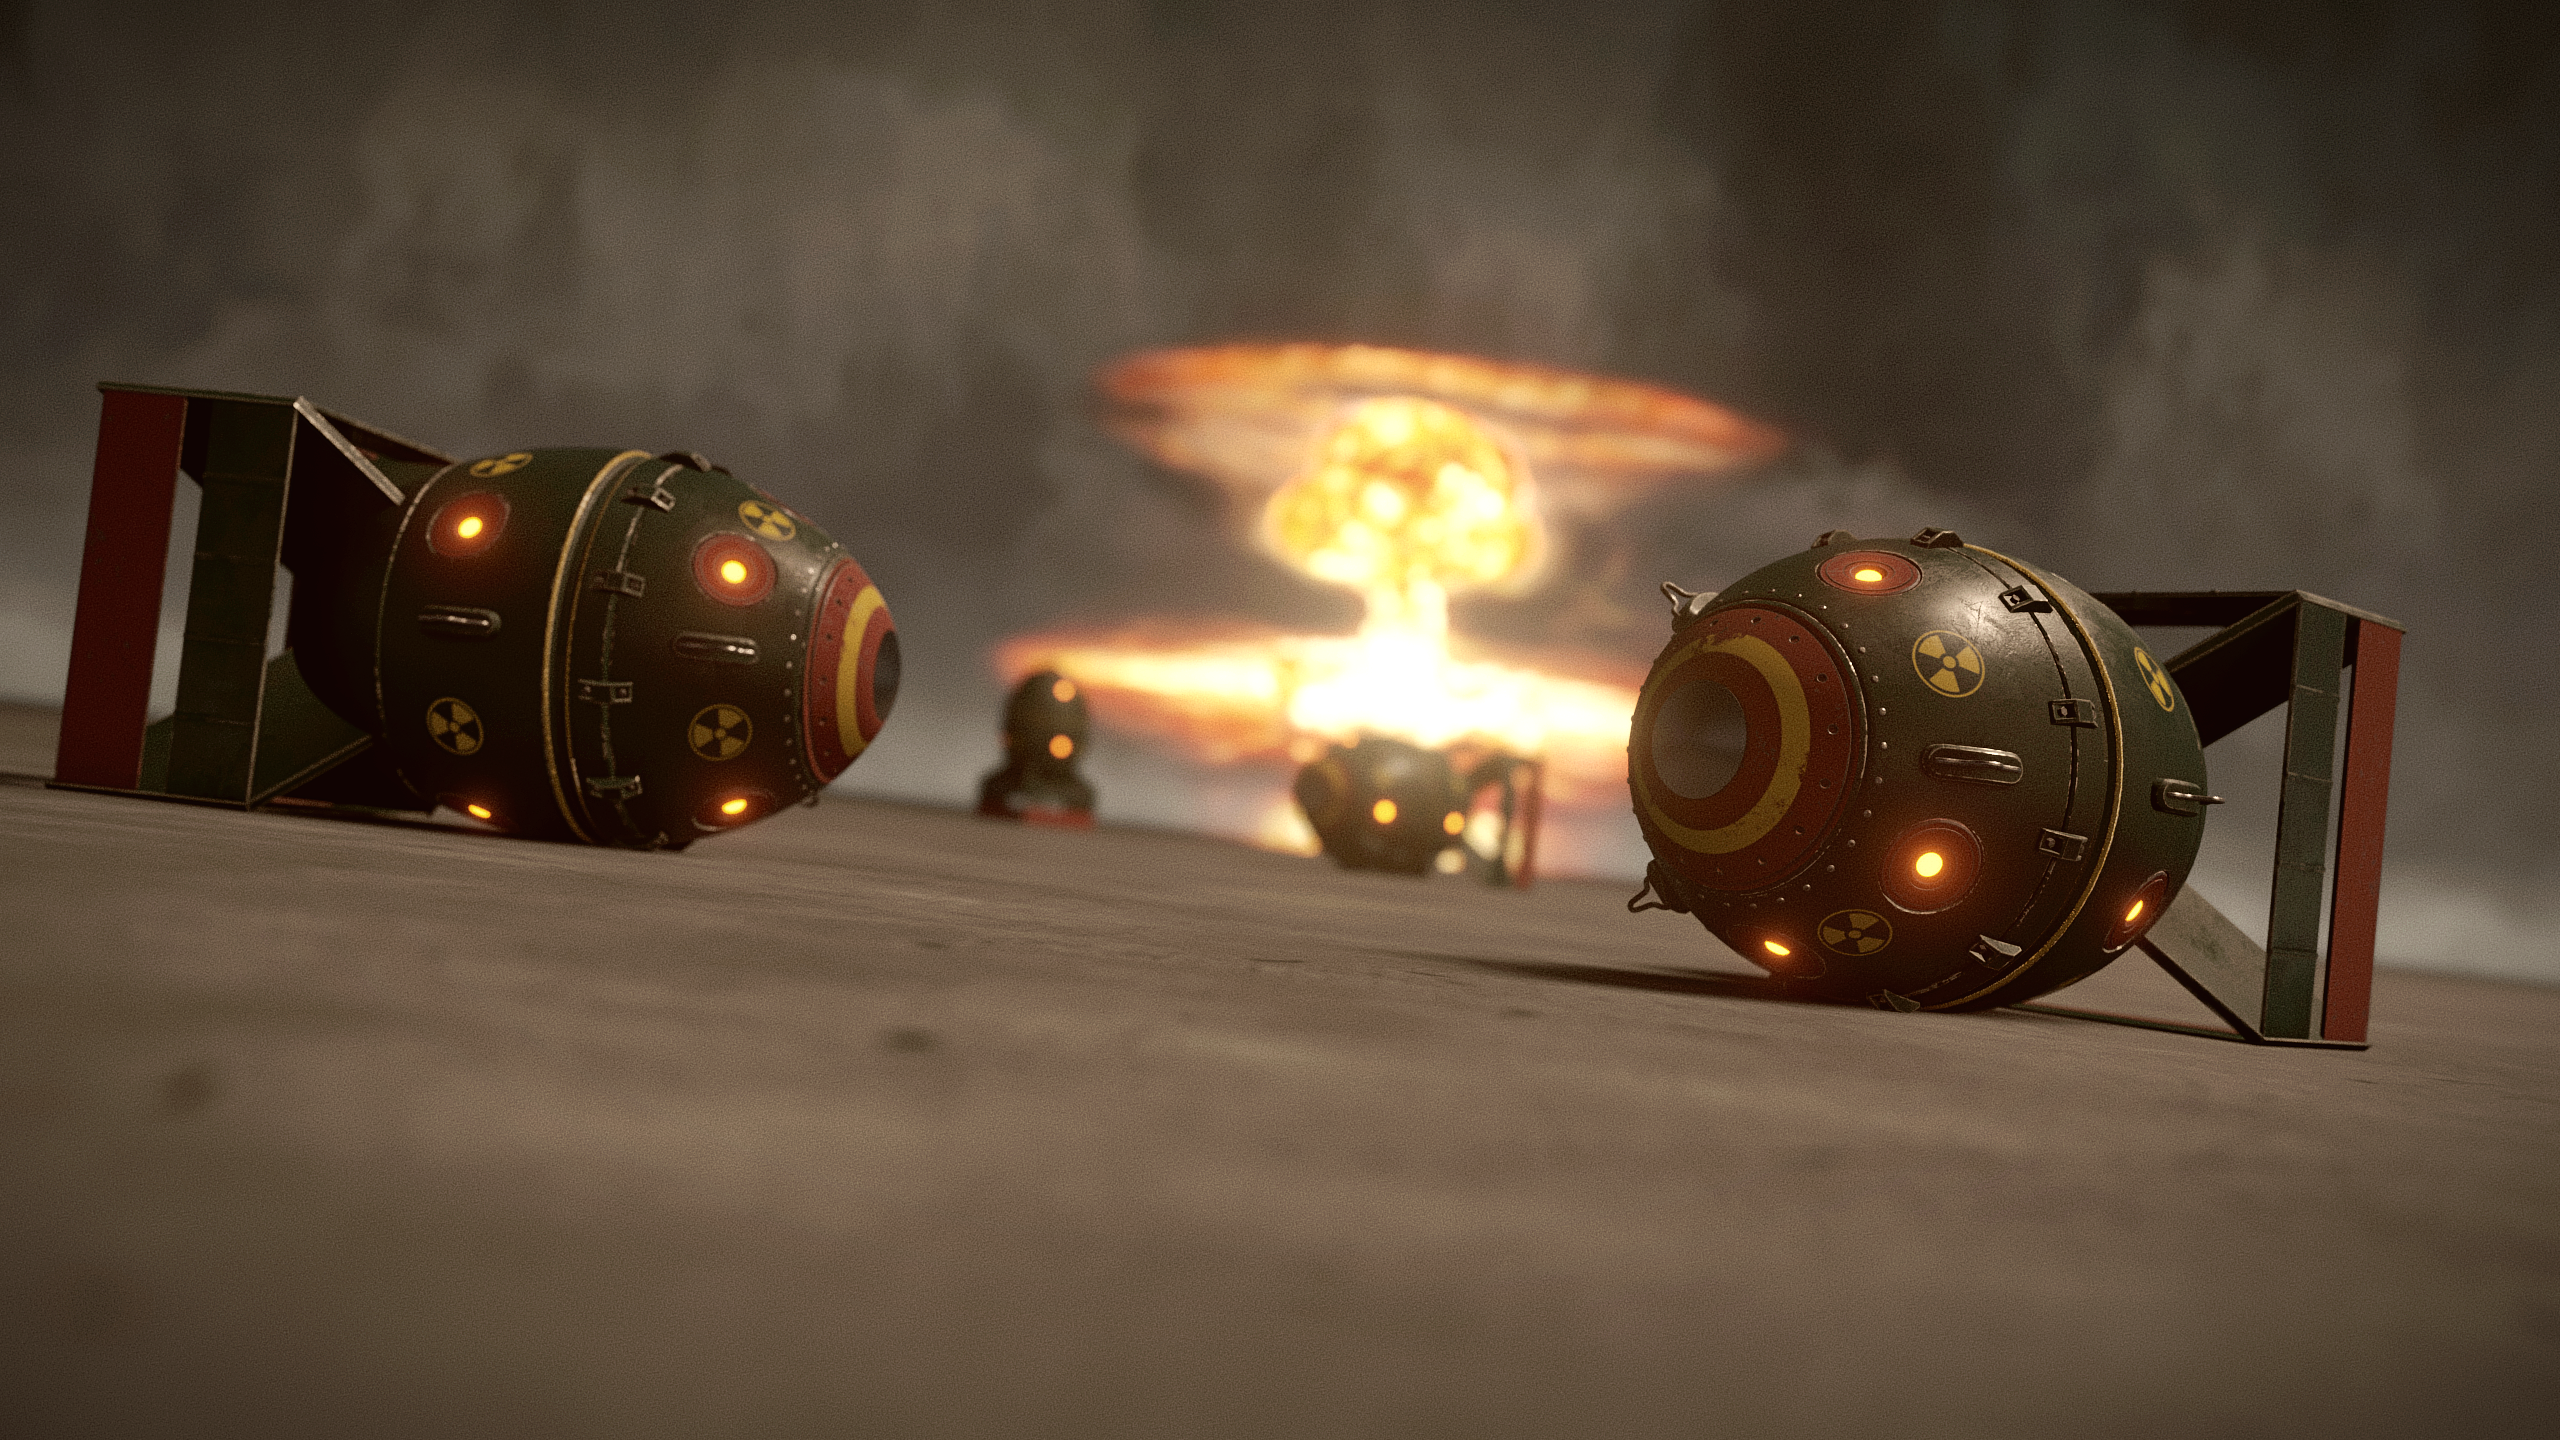 Nuclear Radiation Military Explosion Fictional RMBK 4000 Weapon 2560x1440